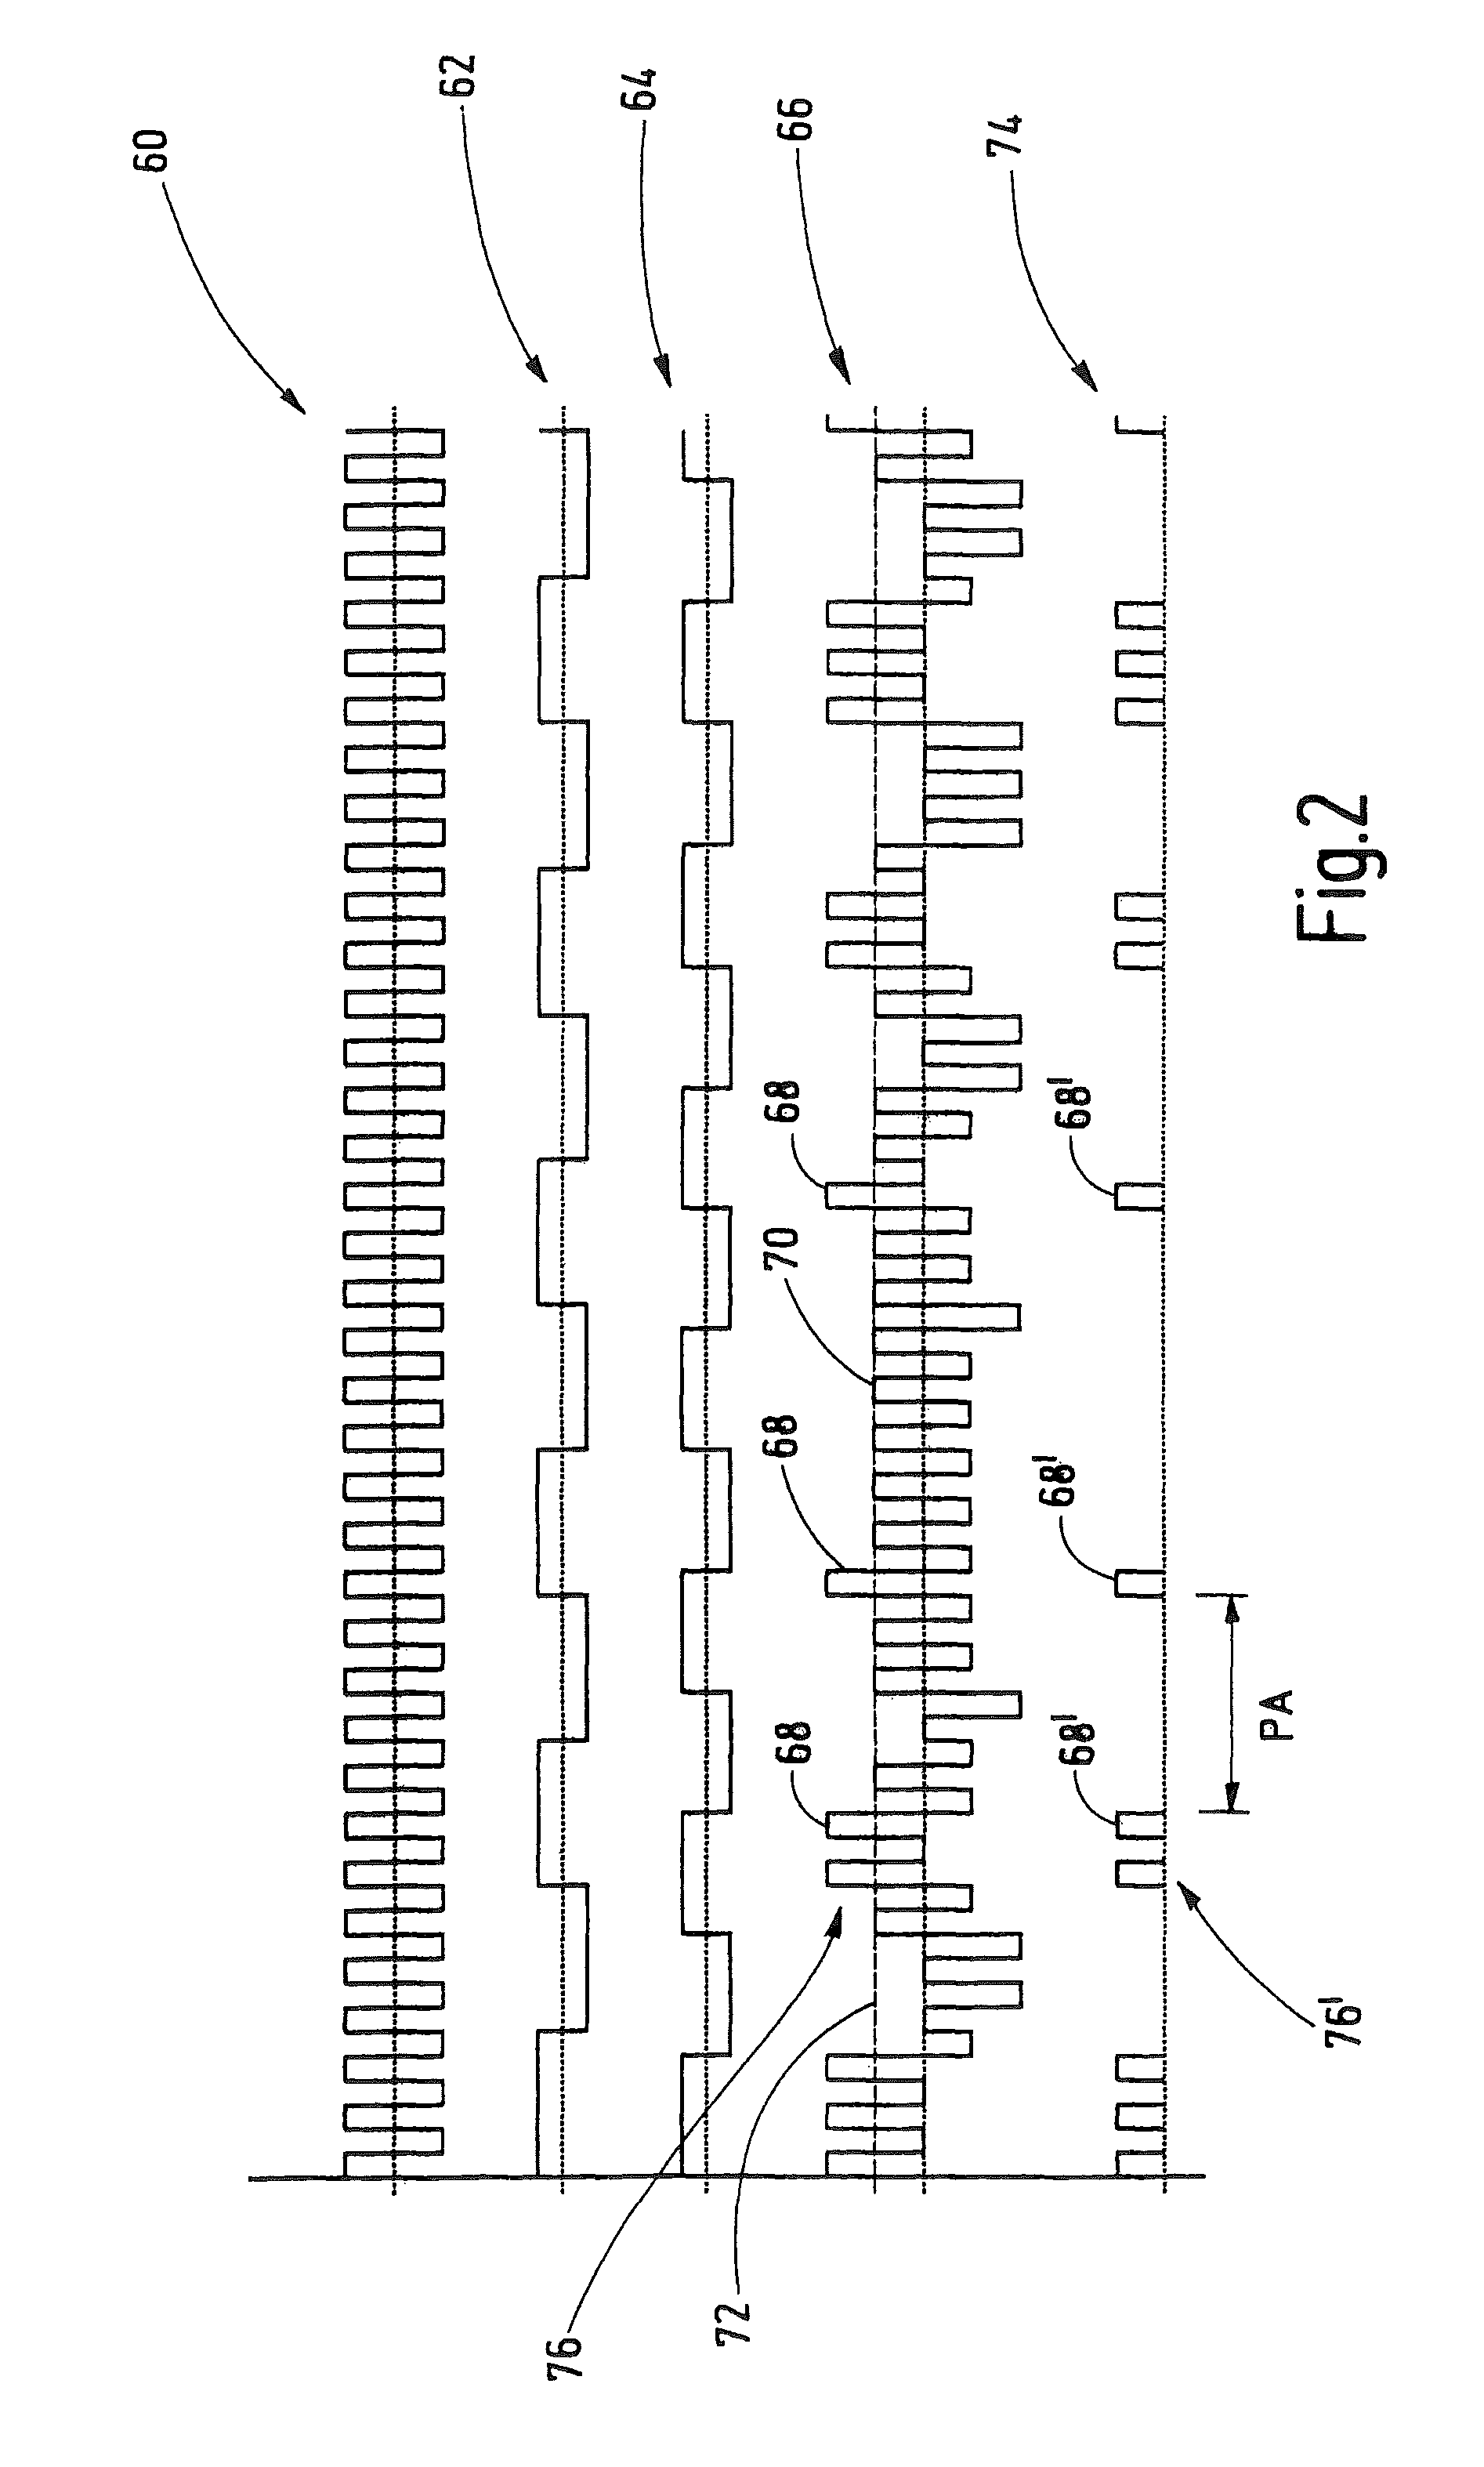 Method and device for determining a distance from an object